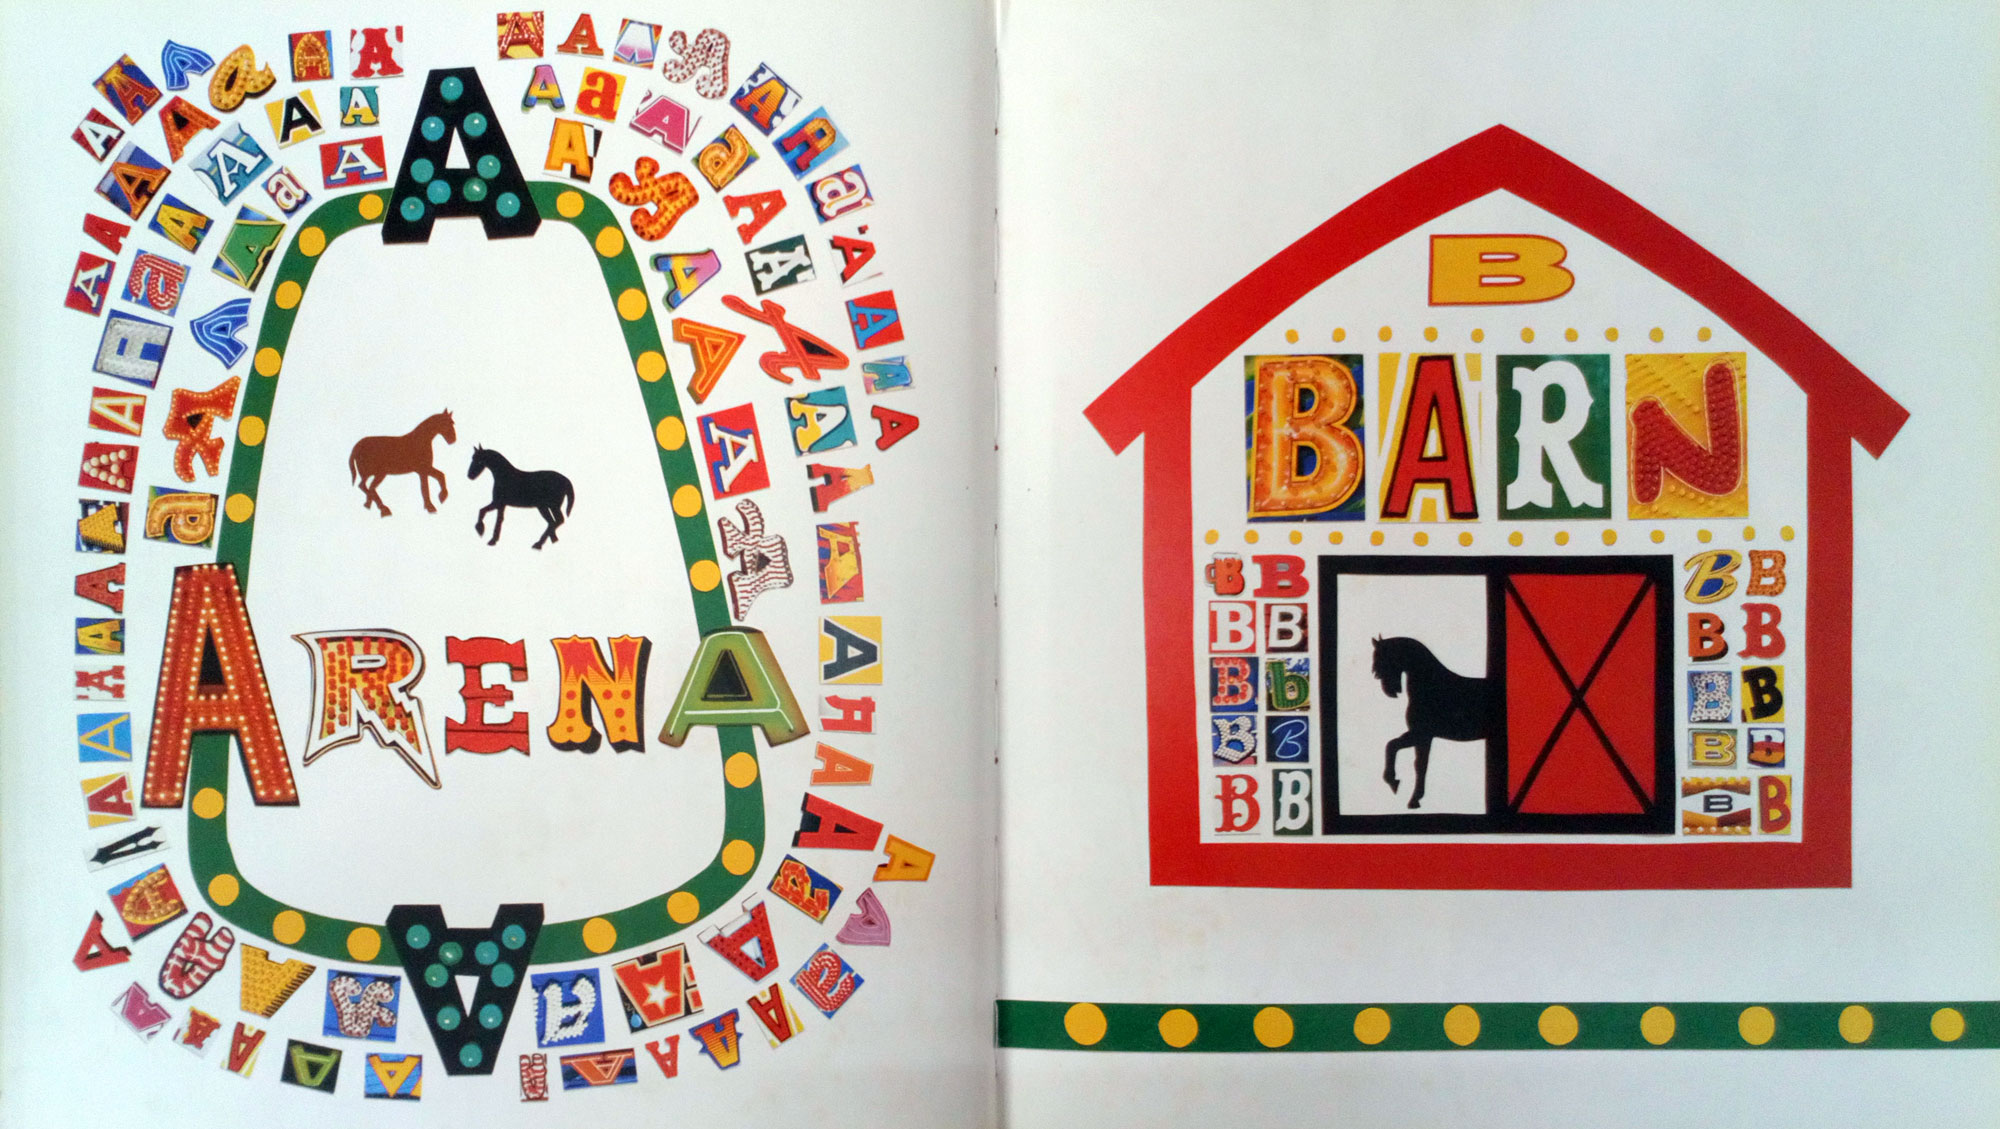 A fabulous fair alphabet - Lotus Community Library - Library For Families